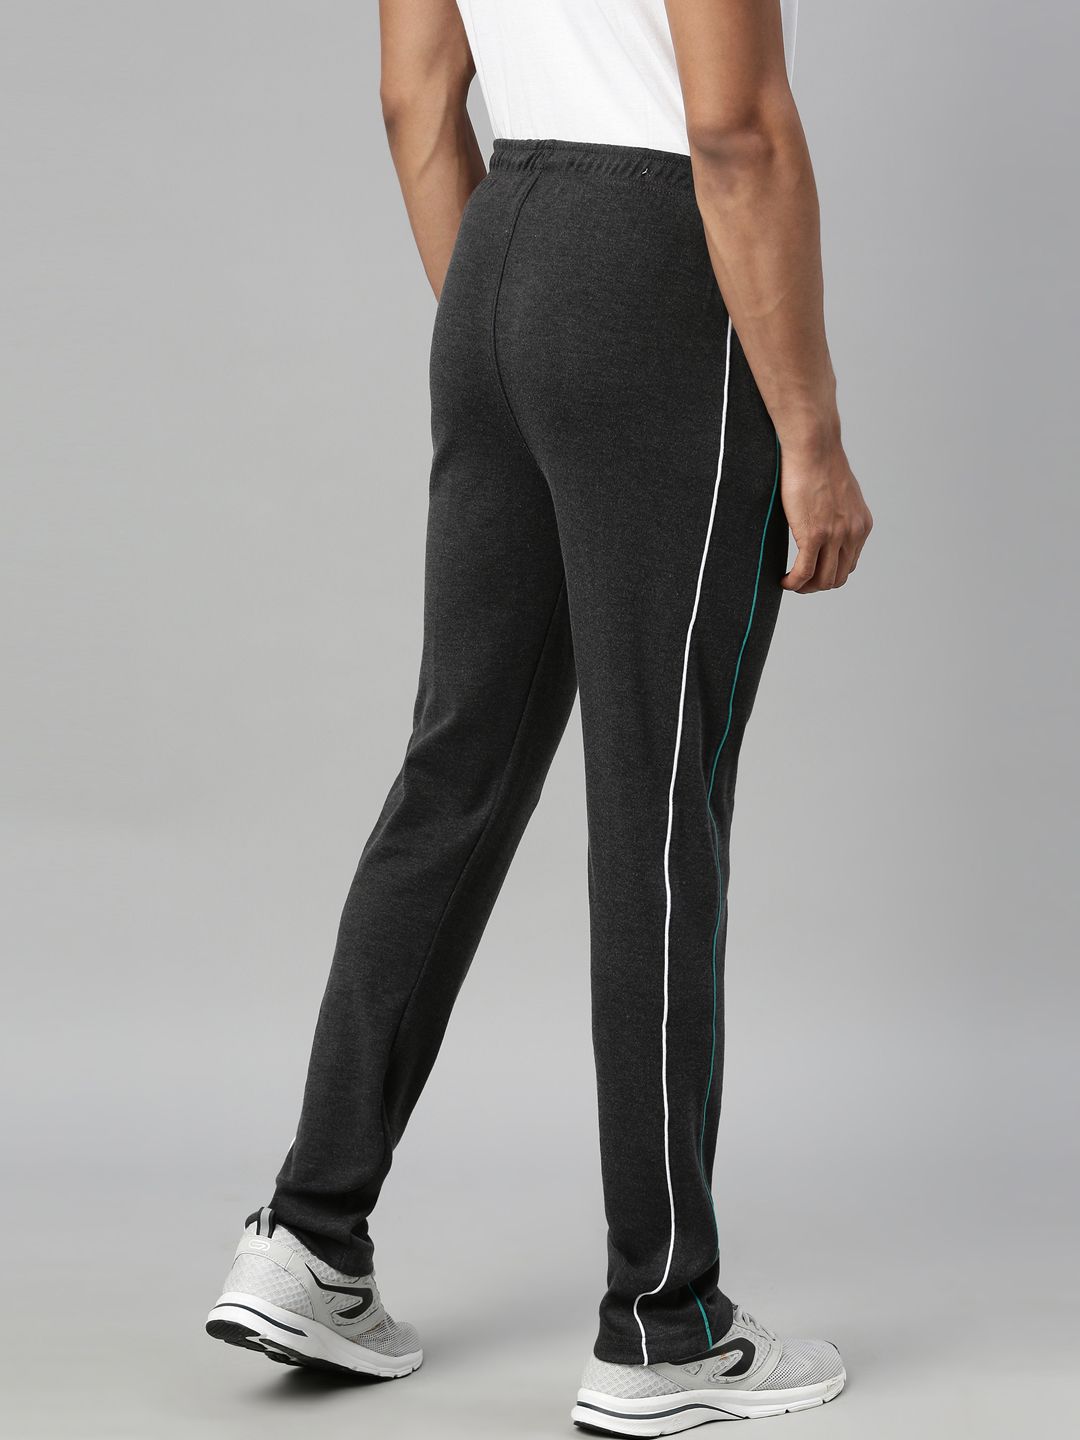 Men's Sports Trackpants Online in India | NIVIA Sports